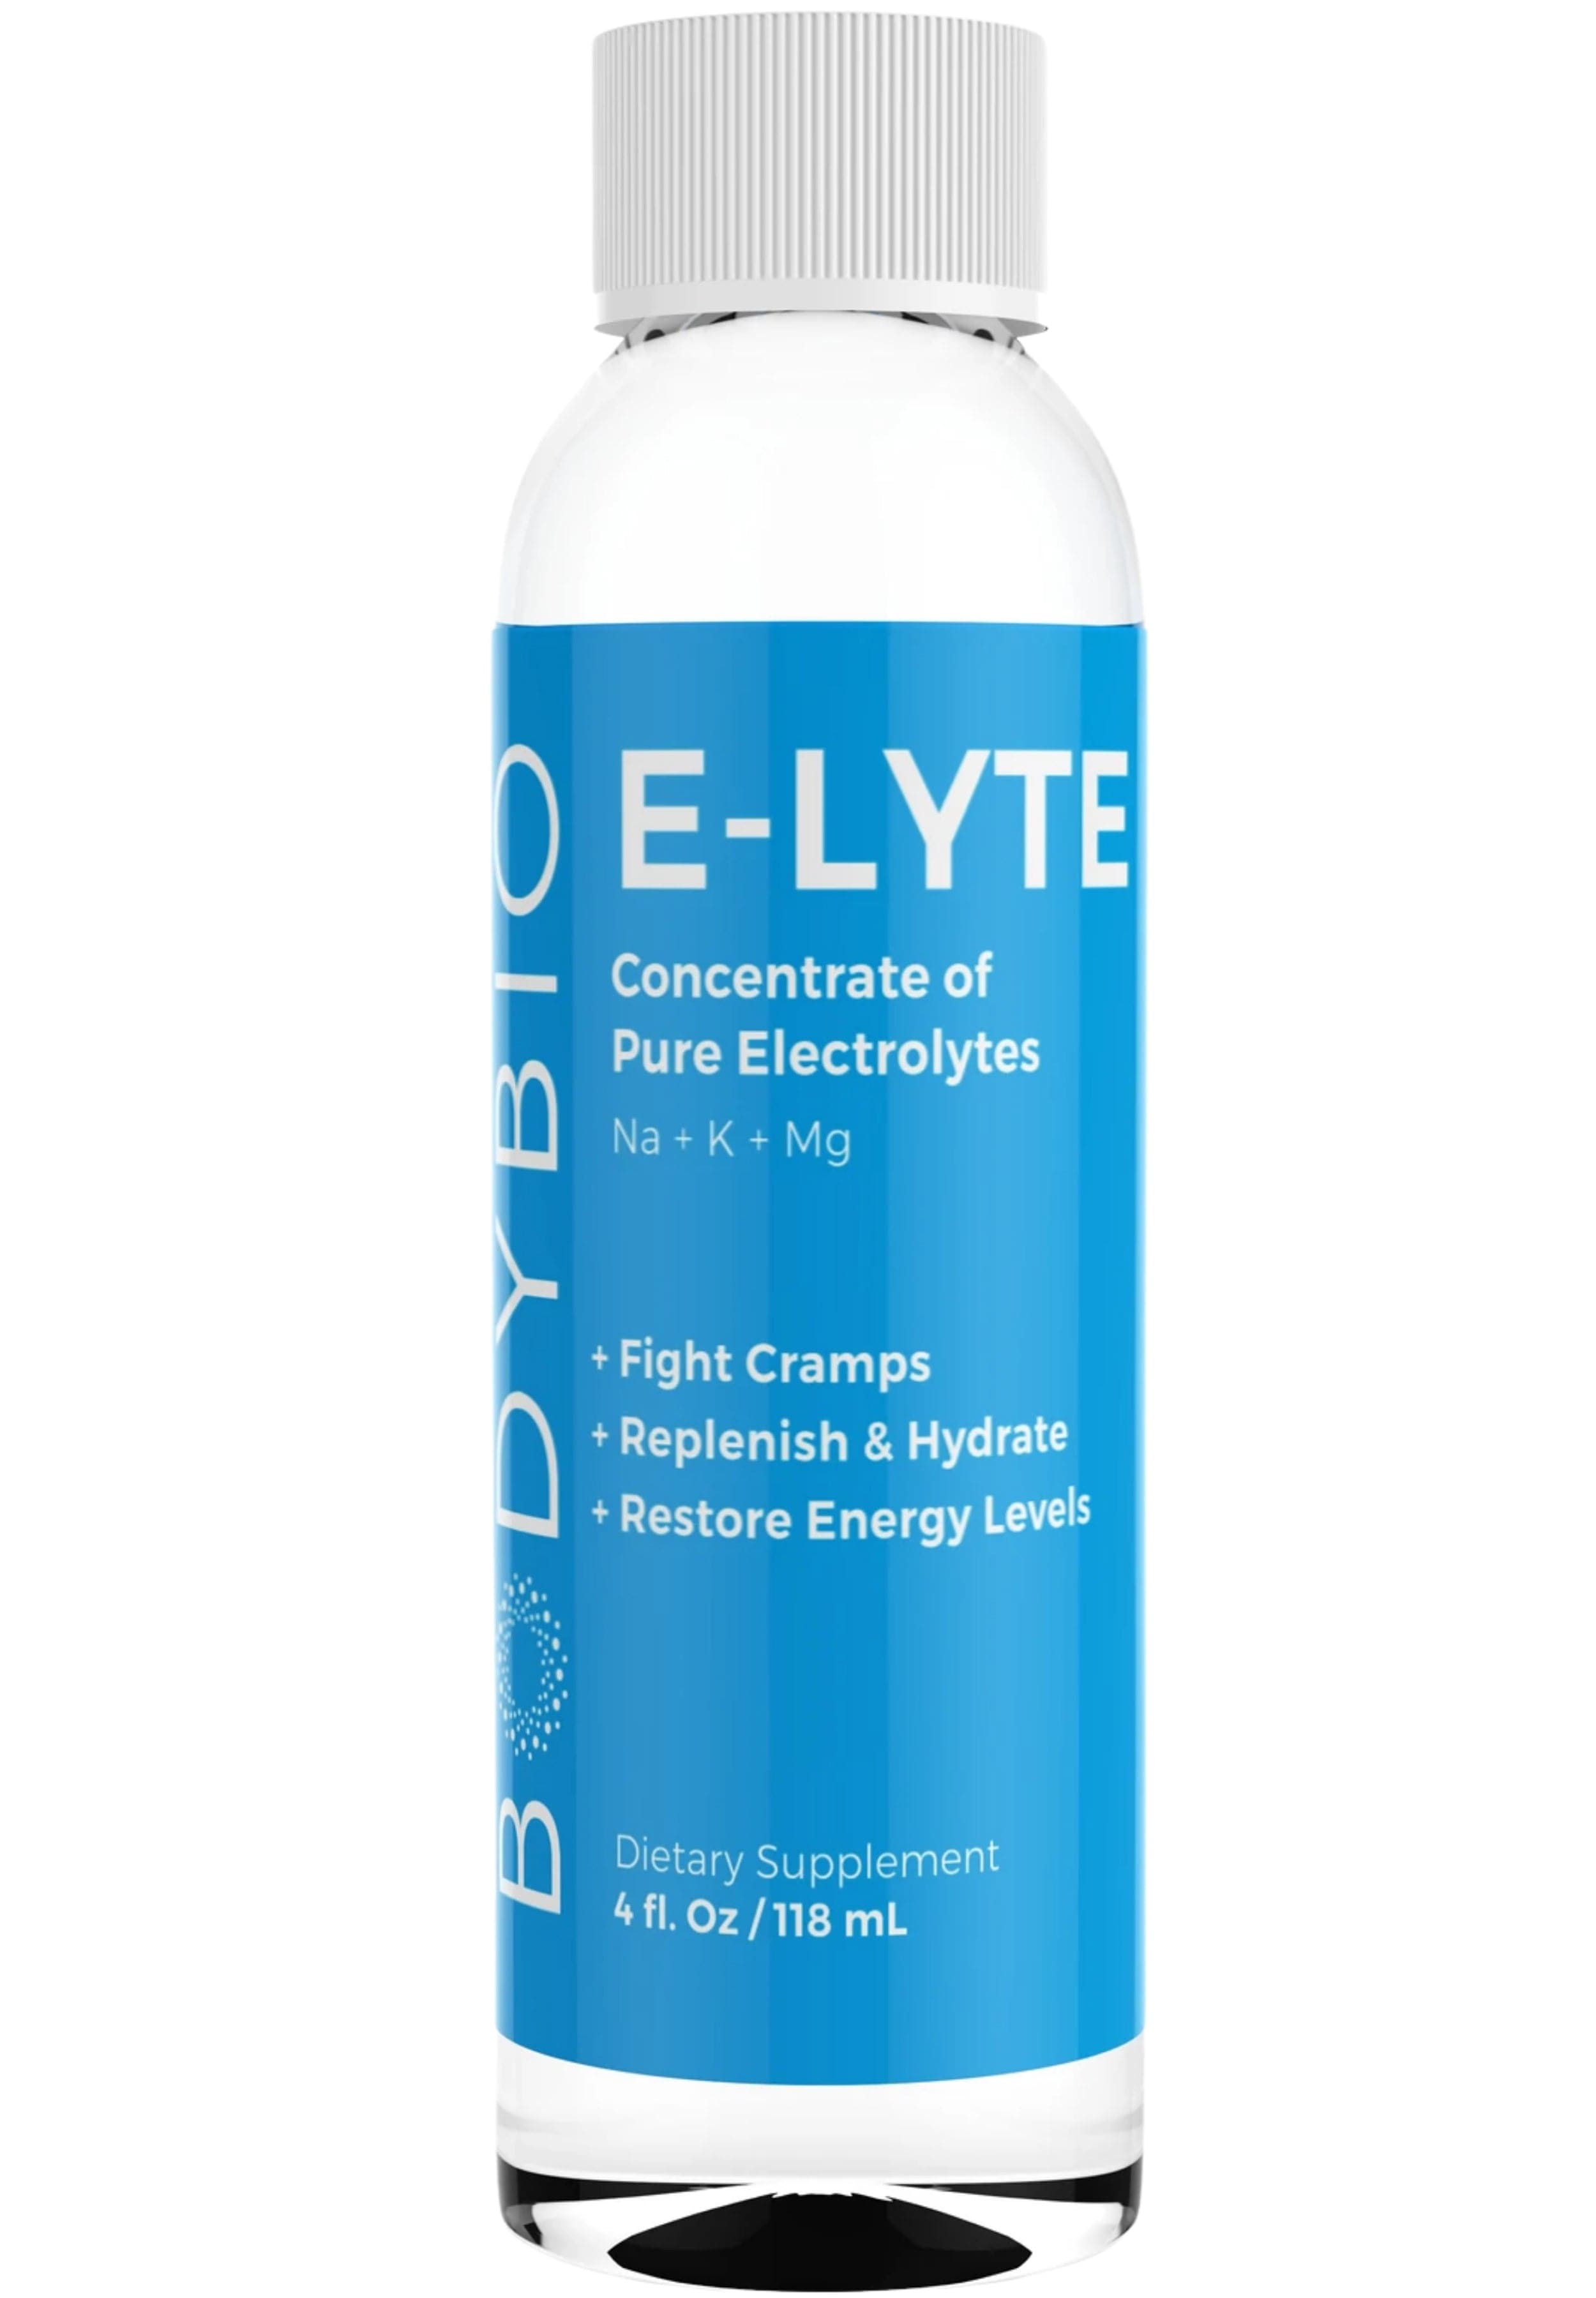 BodyBio E-Lyte Balanced Electrolyte Concentrate